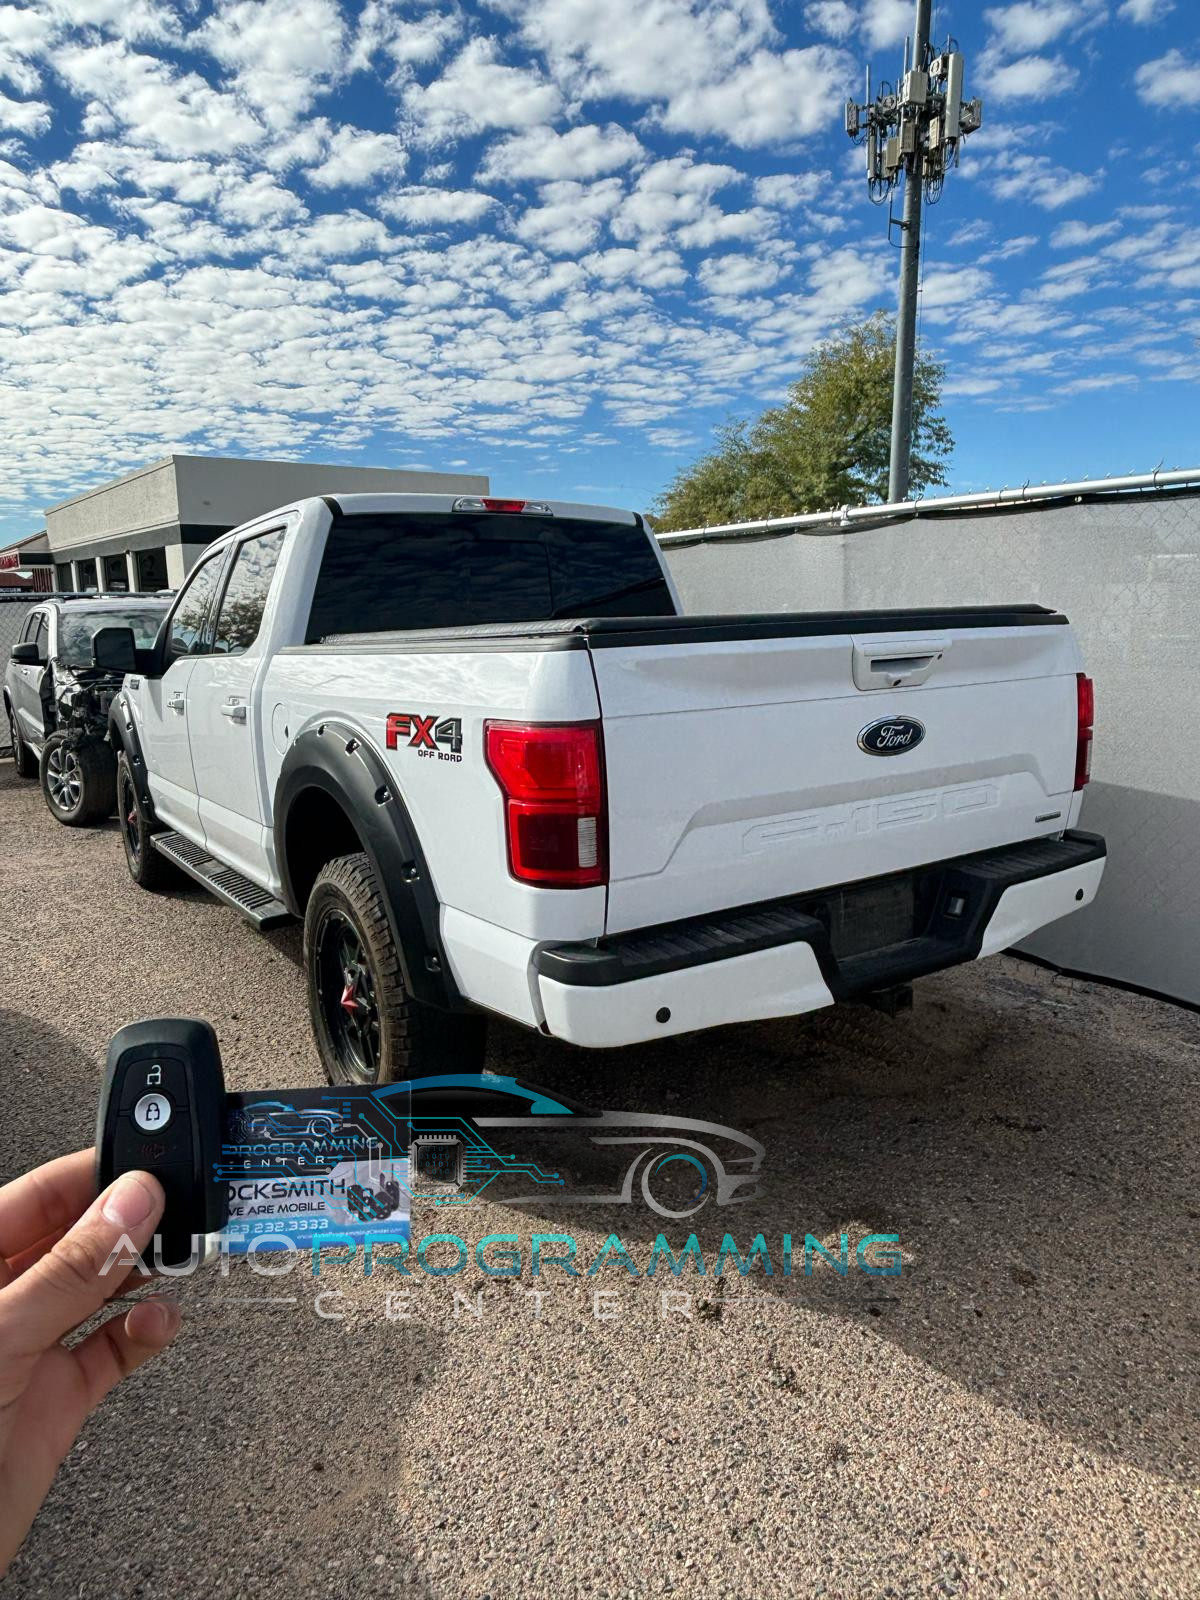 High-resolution image showcasing the modern design and advanced features of a Ford truck key fob for seamless vehicle access and control.